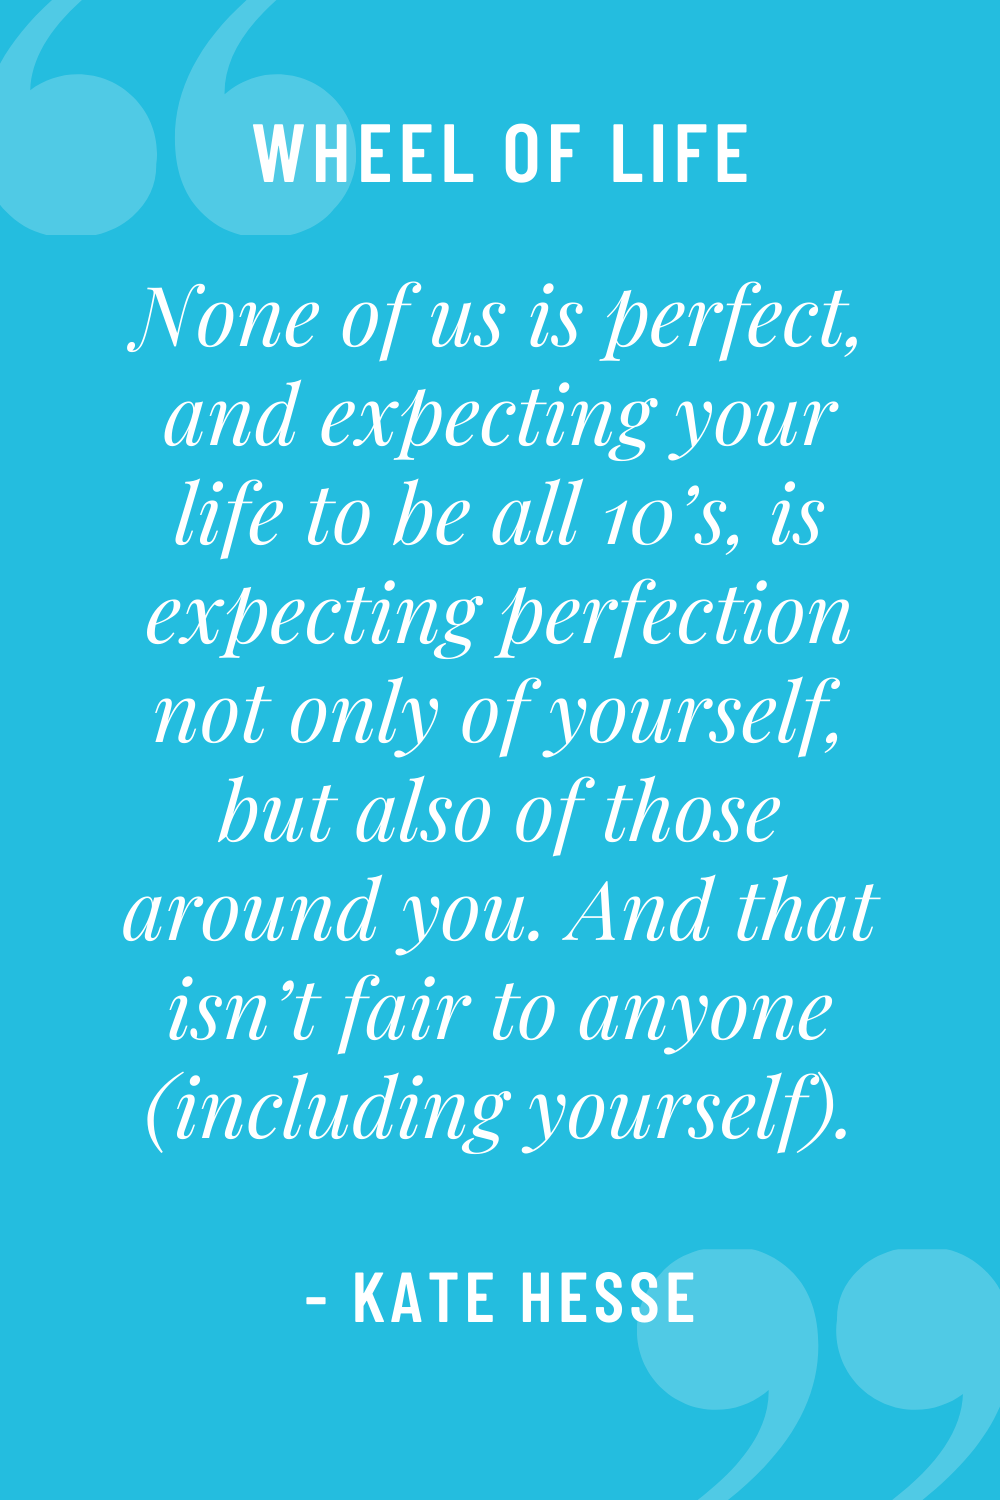 None of us is perfect, and expecting your life to be all 10's is expecting perfection not only of yourself, but also of those around you.  And that isn't fair to anyone (including yourself).